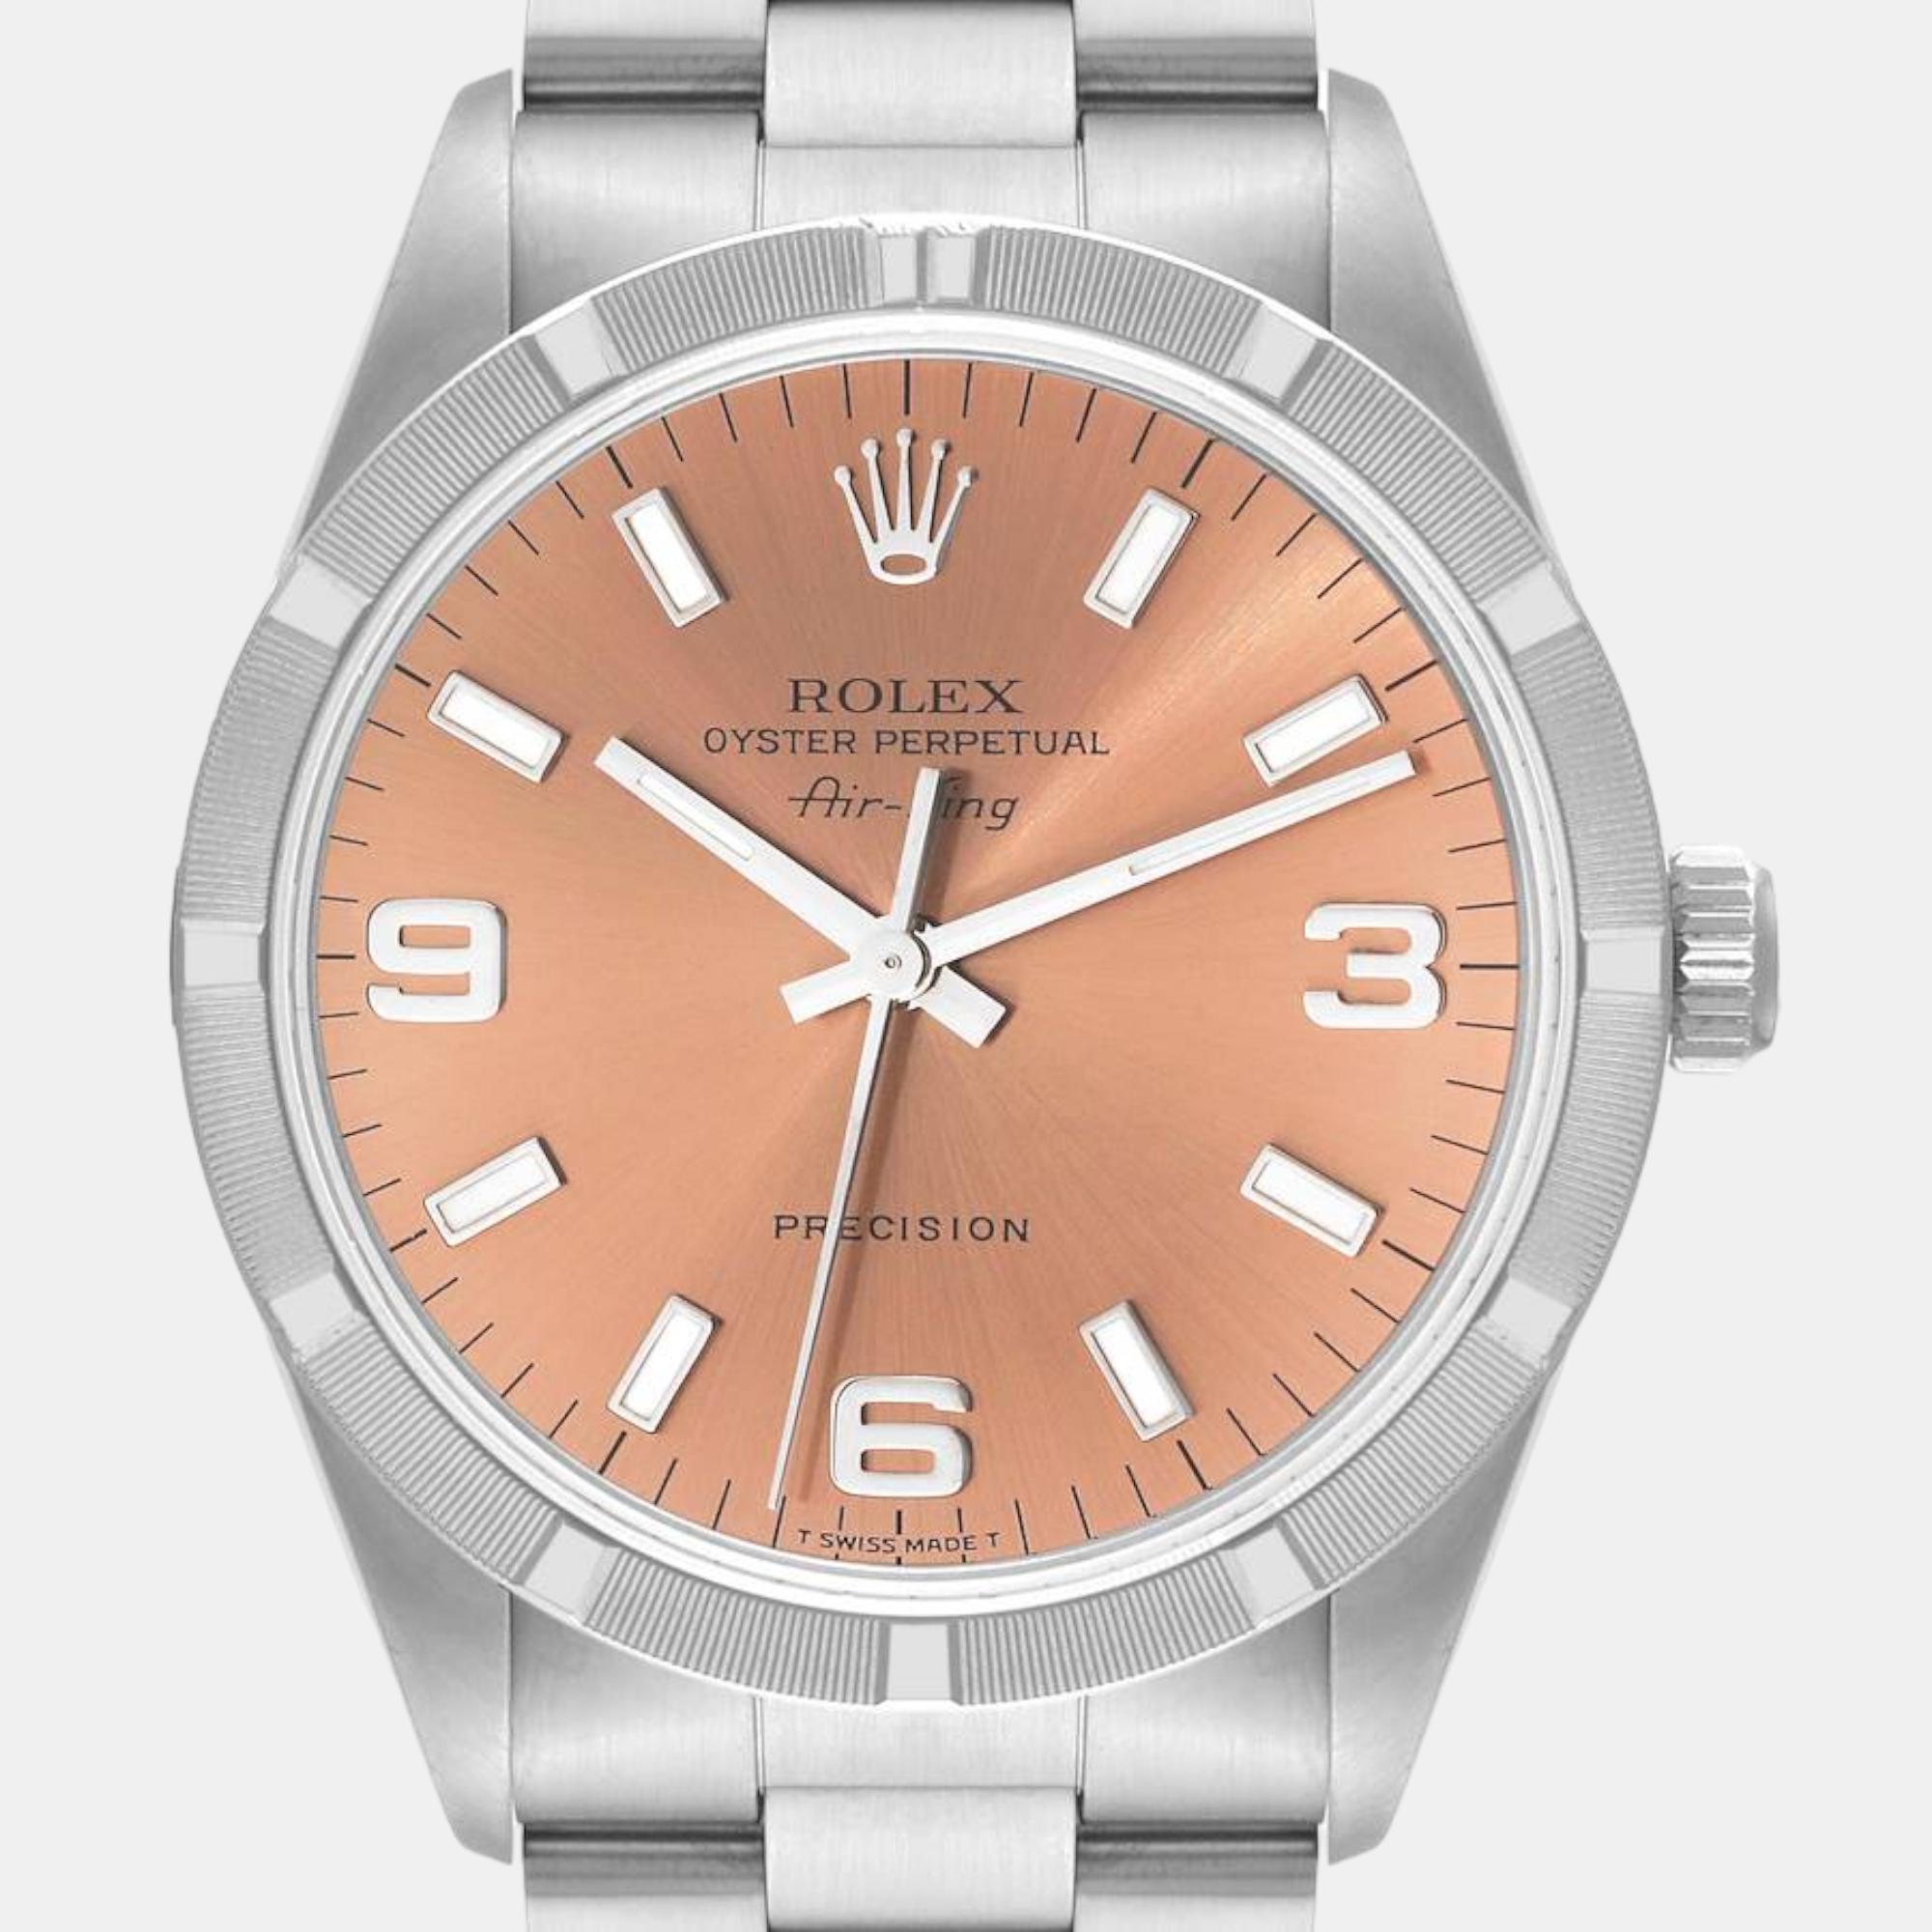 Rolex Air King 34 Salmon Dial Engine Turned Bezel Steel Mens Watch 14010